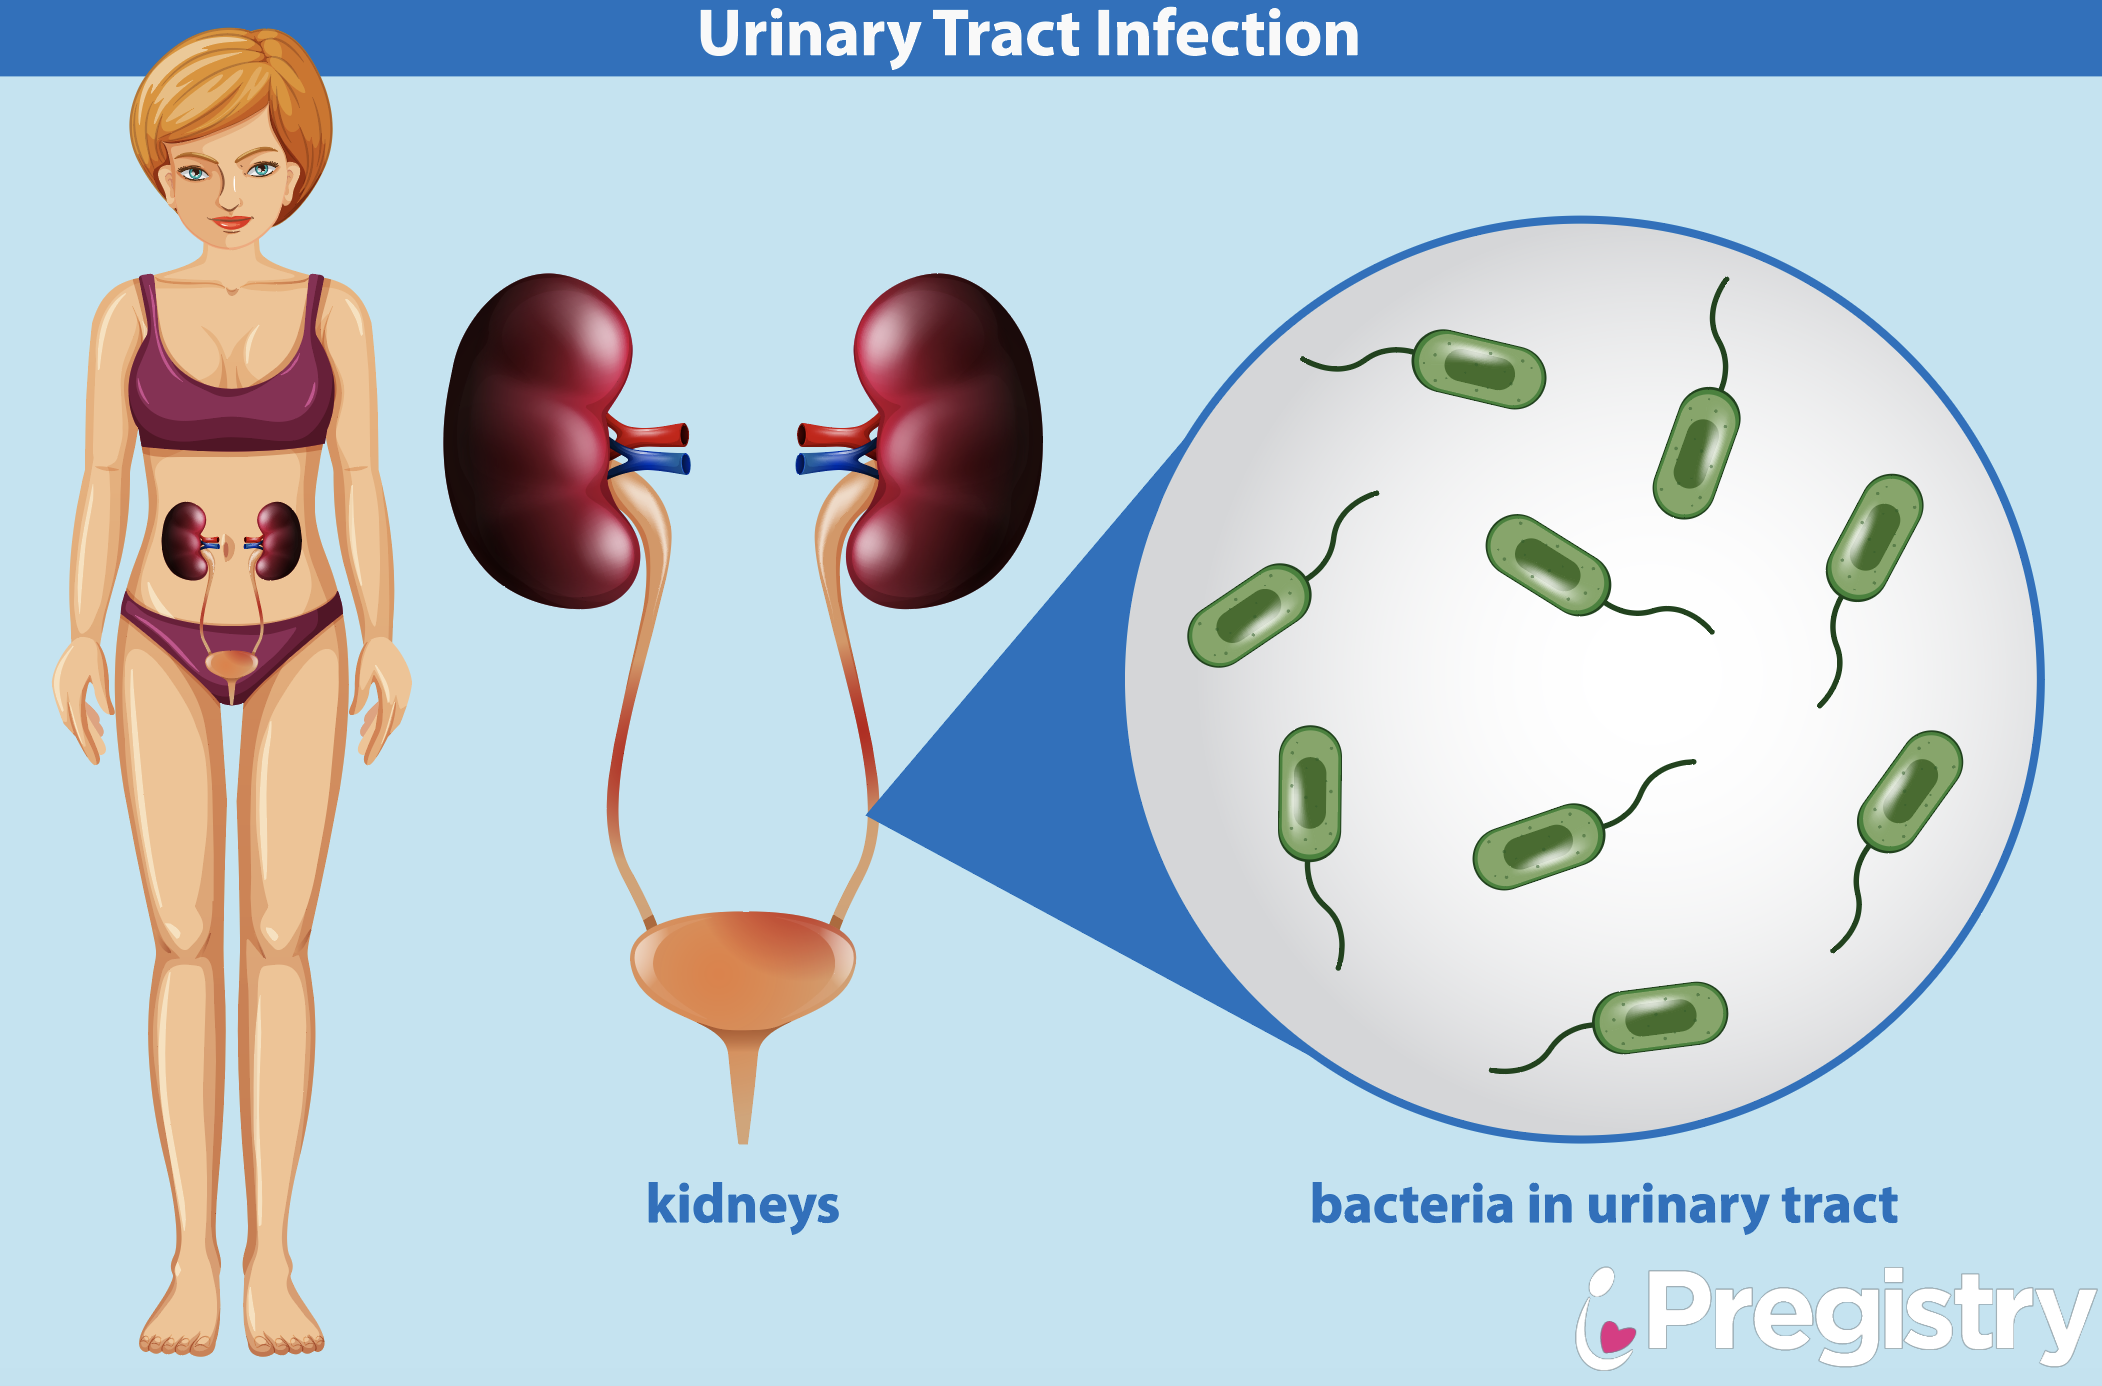 Urinary Tract Infection During Pregnancy